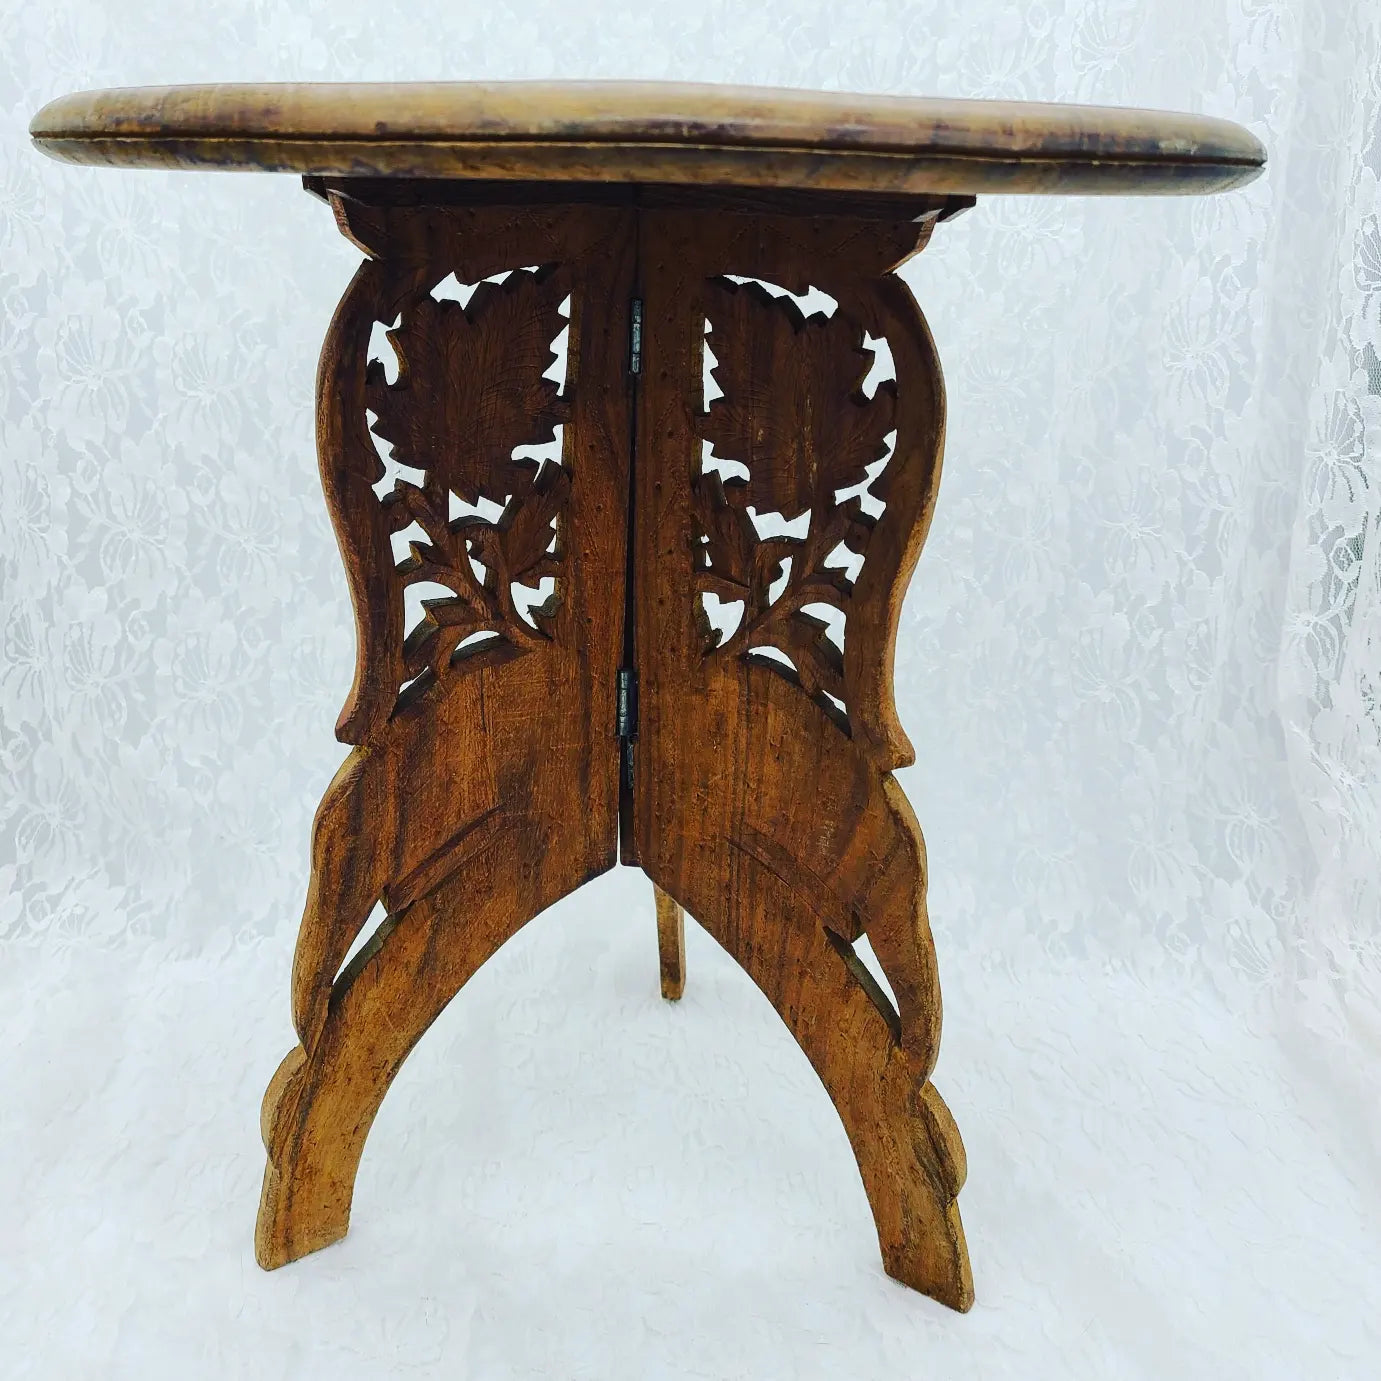 Antique Altar Table Hand Carved Sheesham Wood Triple Leg Table India Handmade Folds Up